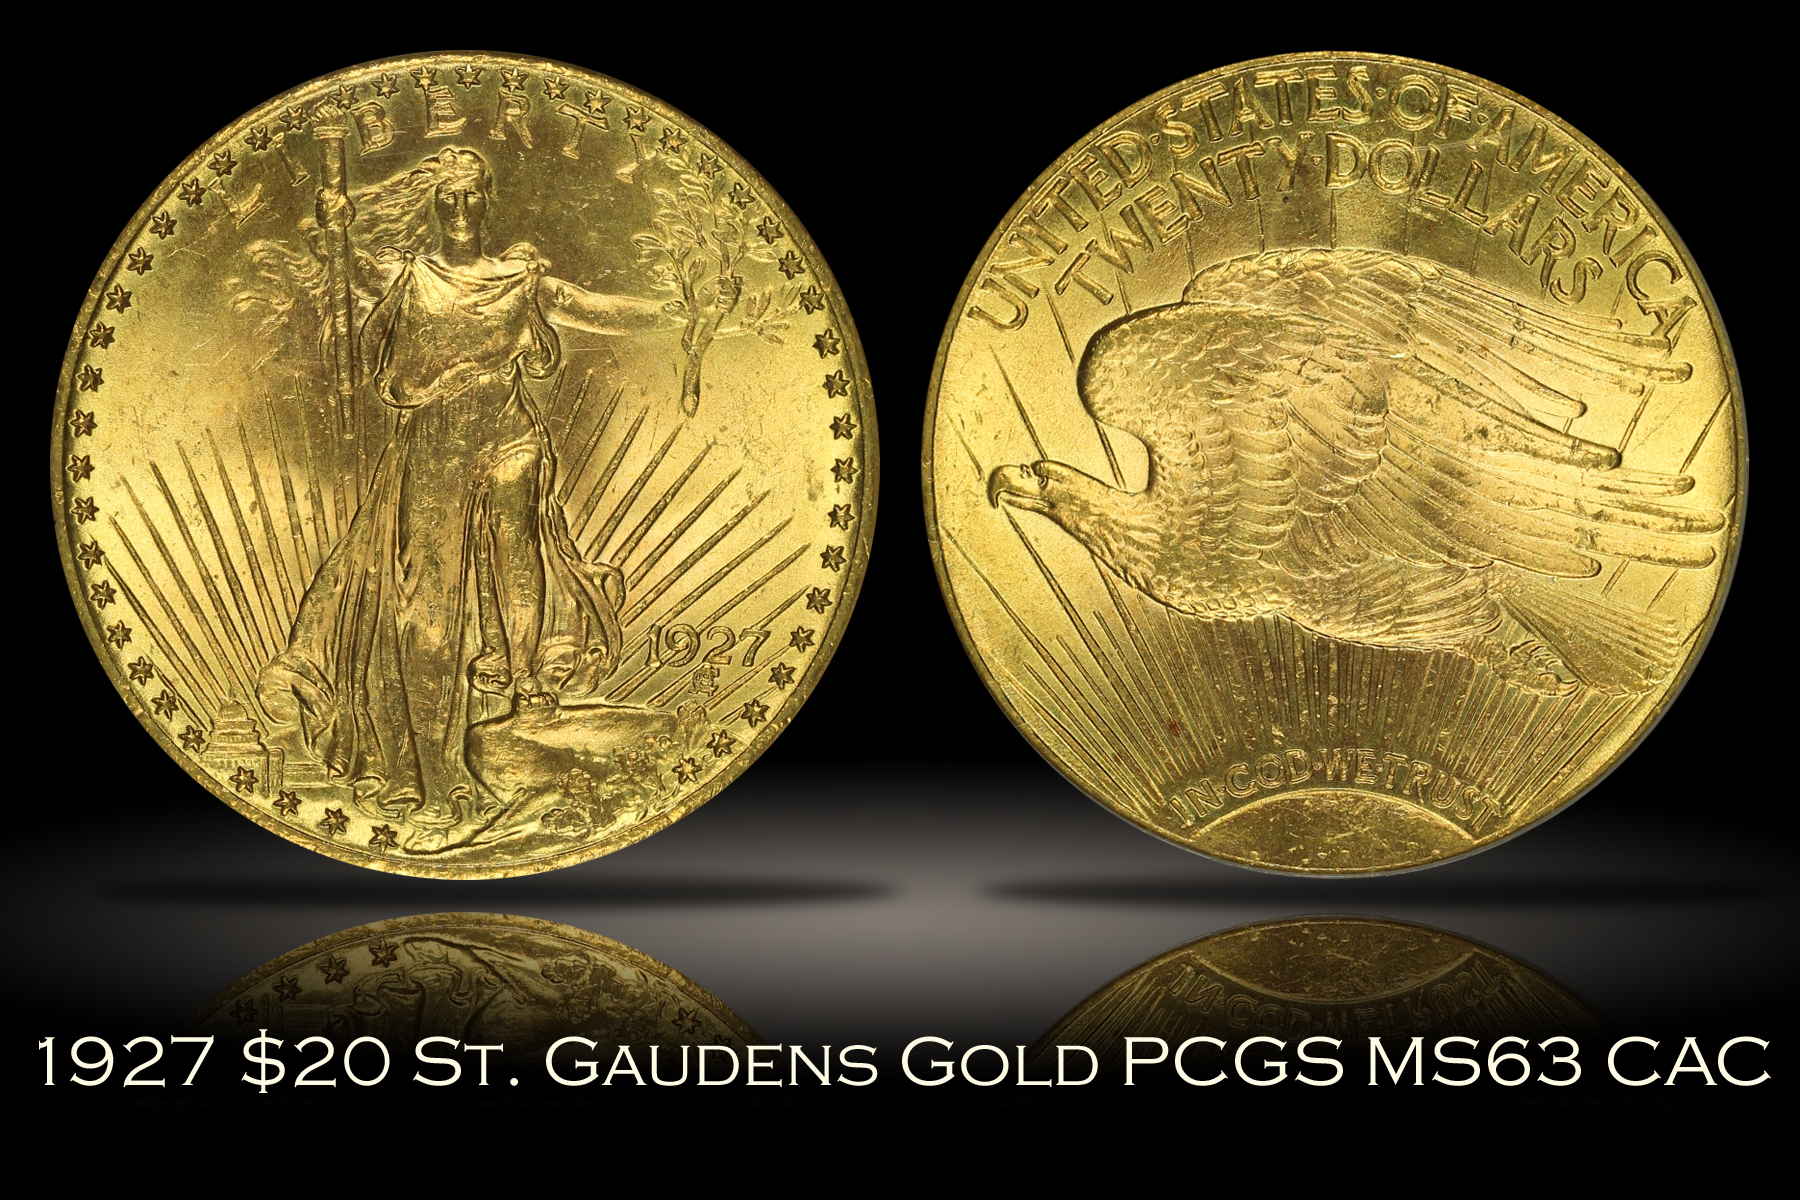 Michael Kittle Rare Coins - 1927 $20 St. Gaudens Gold PCGS MS63 CAC OGH